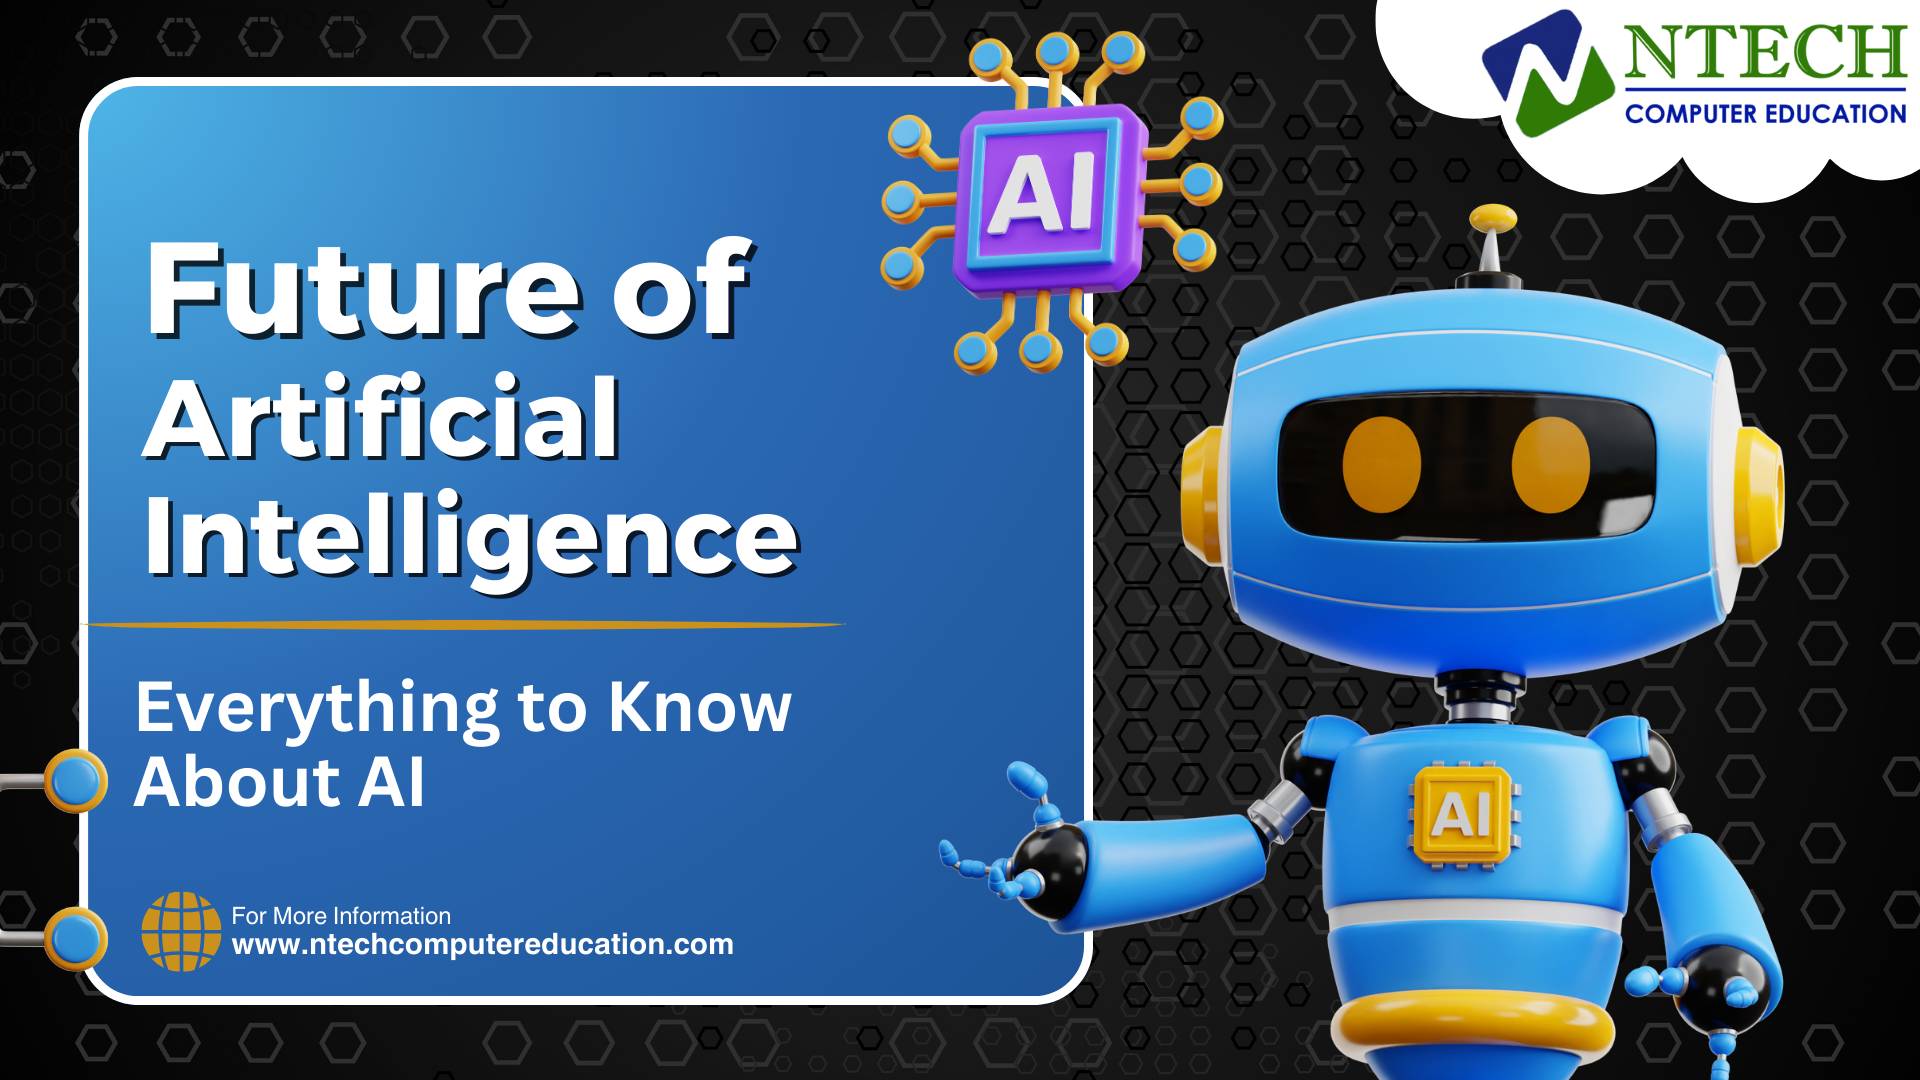 Future of AI: Everything to Know about Artificial Intelligence